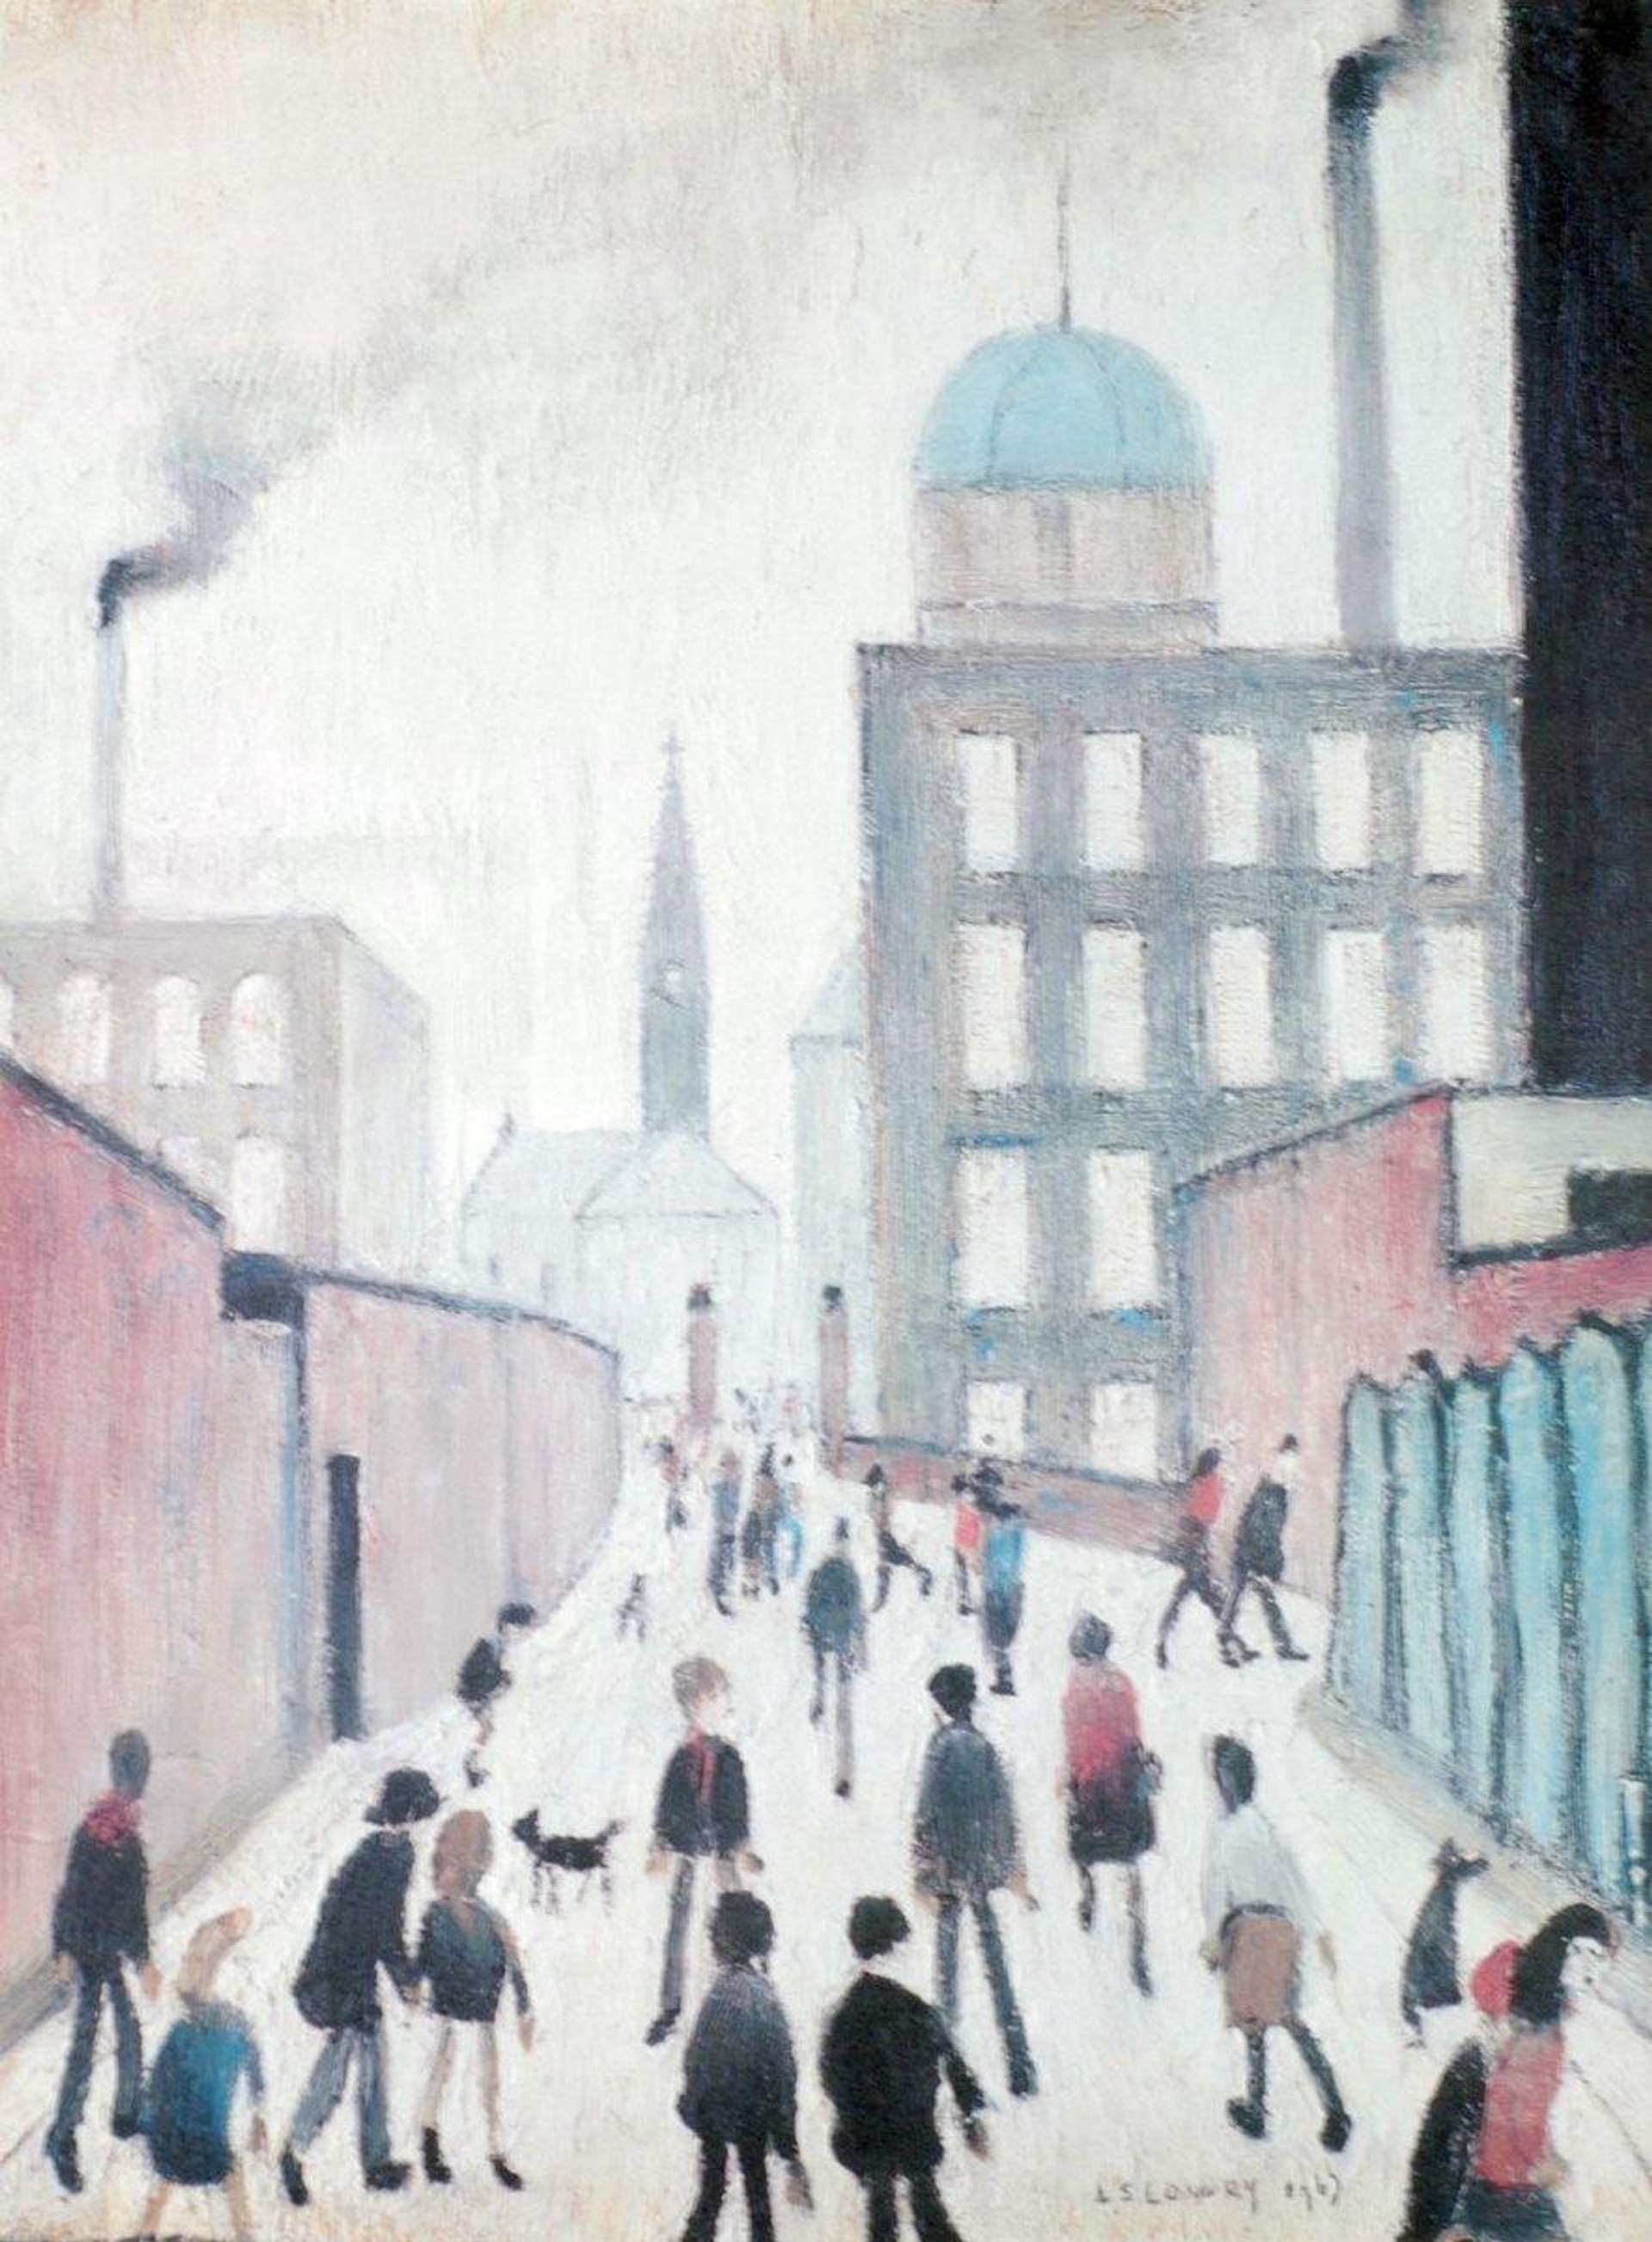 L.S. Lowry’s Mrs Swindell's Picture. A lithograph of a city landscape with people in the centre of the street. 